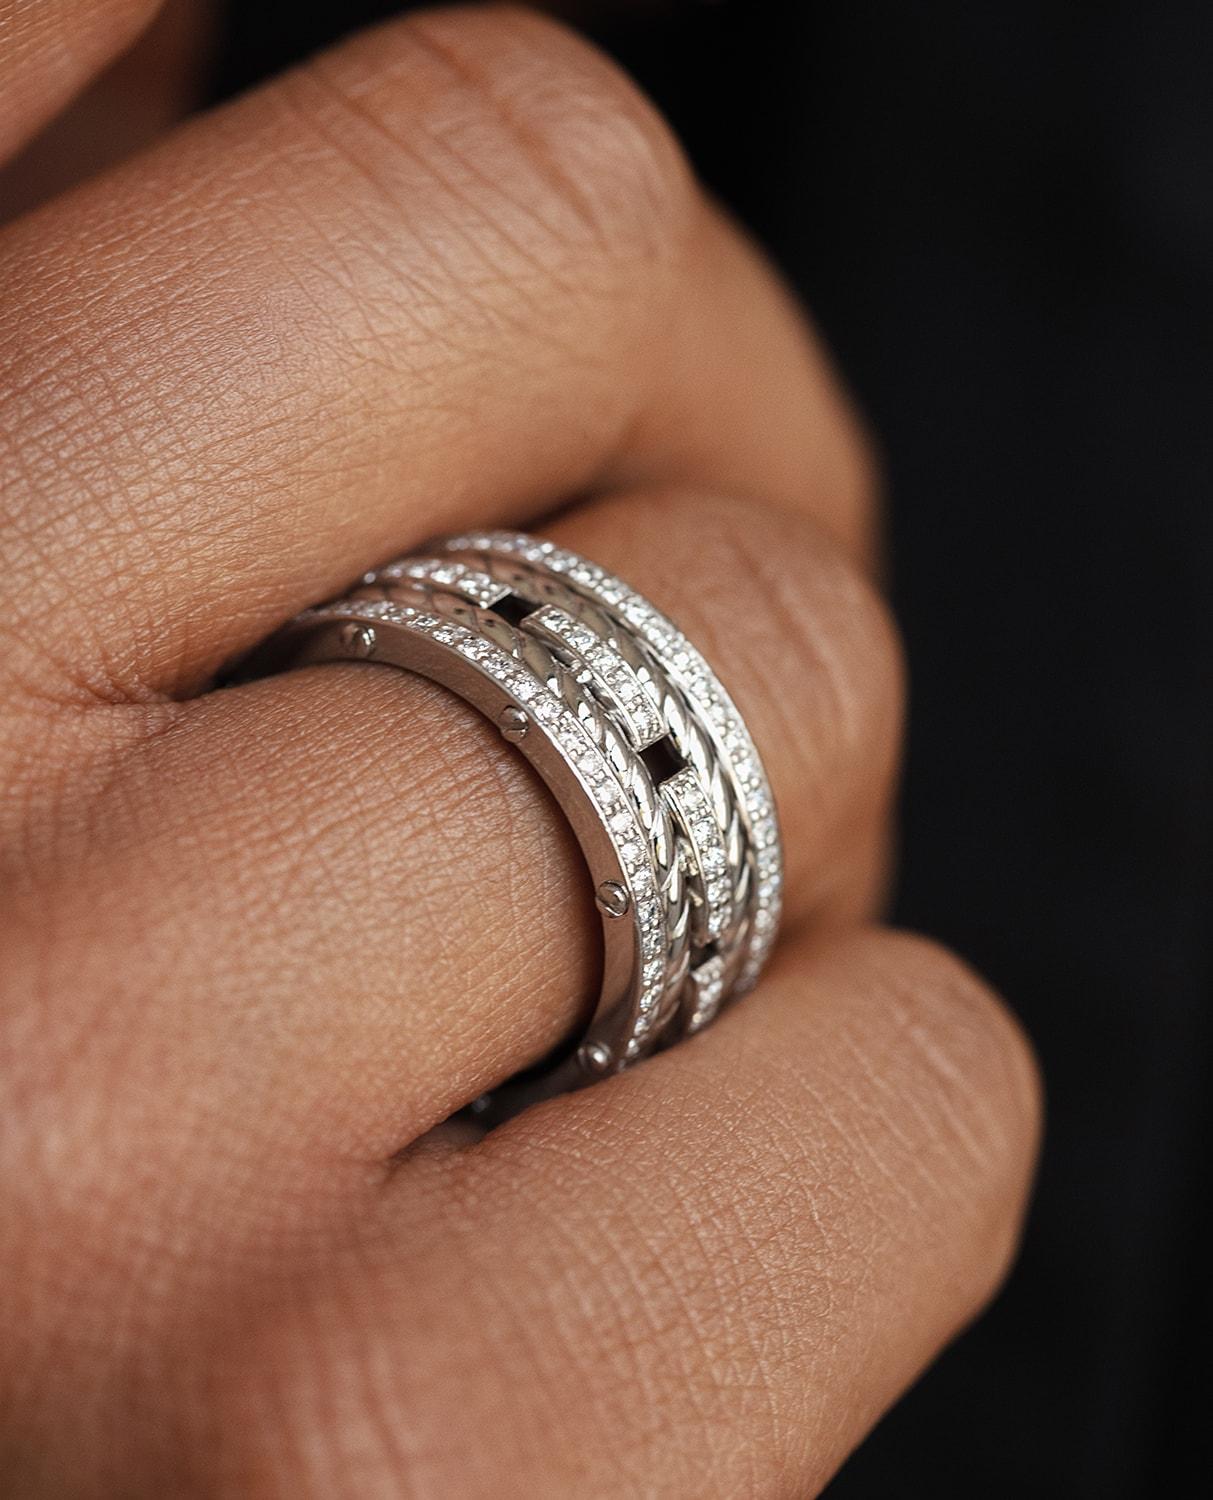 Three bold-looking rings, pave set with 1.45ct brilliant cut round white diamonds, connected by the signature exclusive Rockford screws with rope designs flowing in between the bands. Our ROPES ring has a very modern, striking look with a special